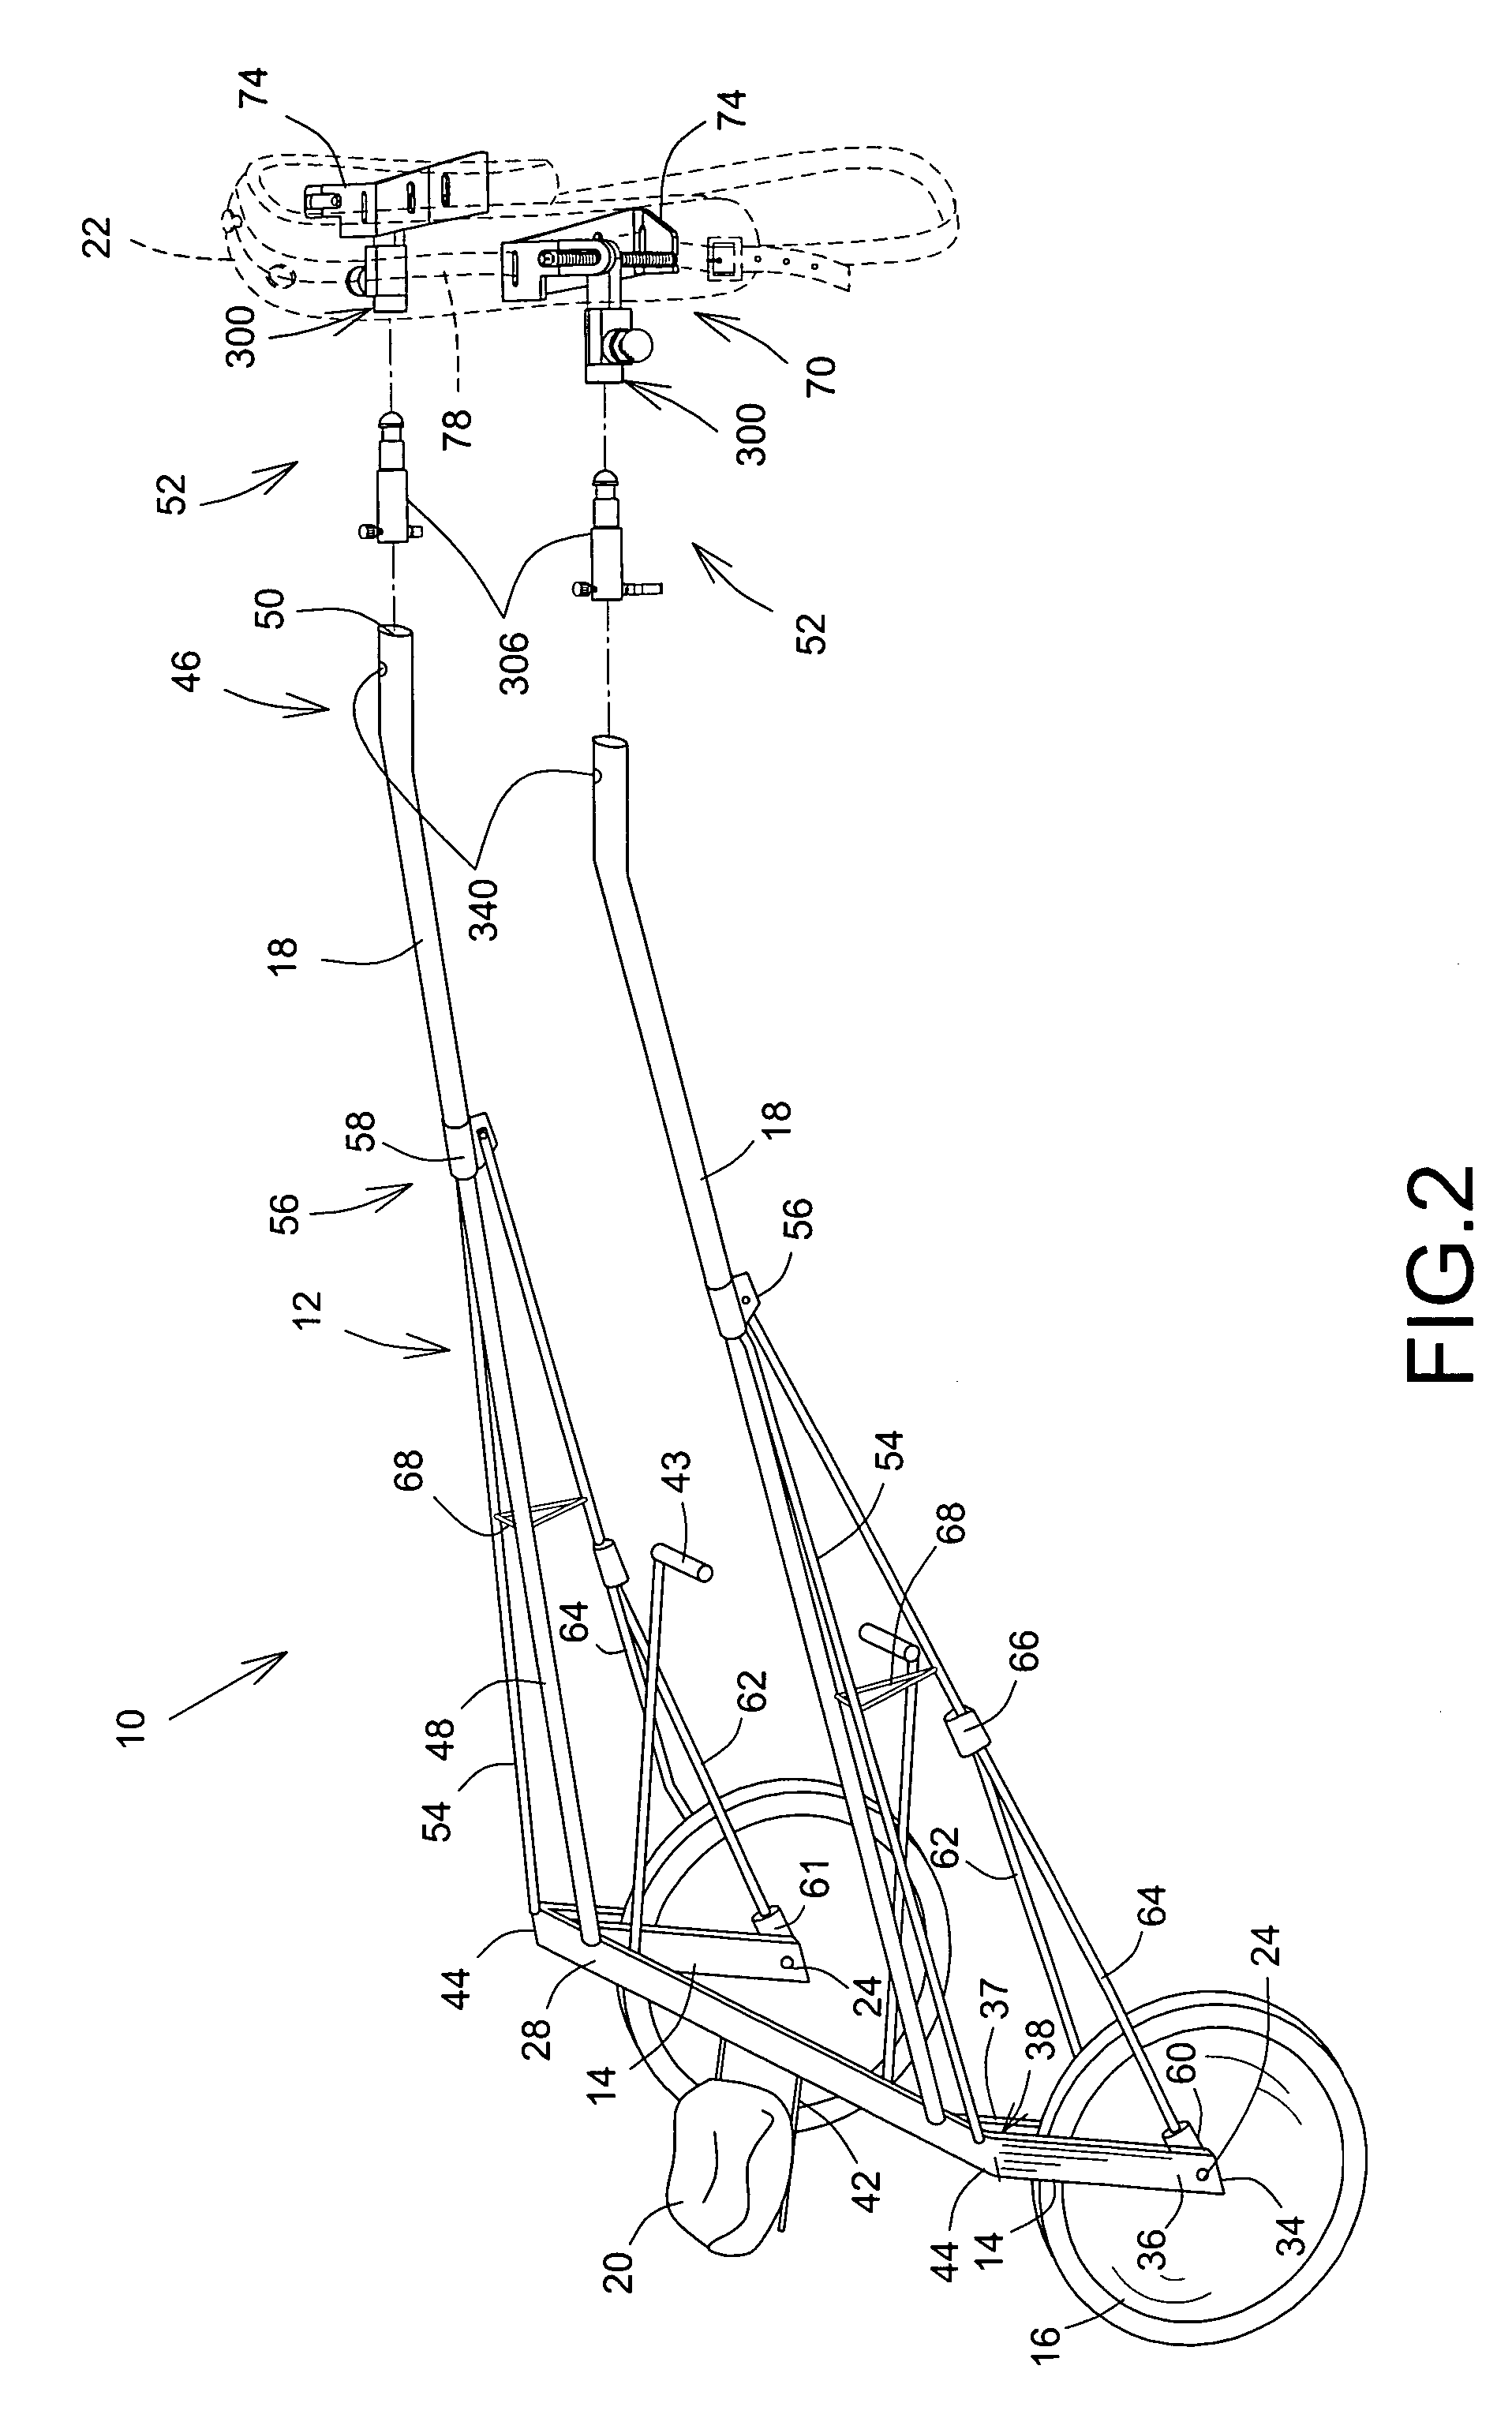 Sulky shaft connector device